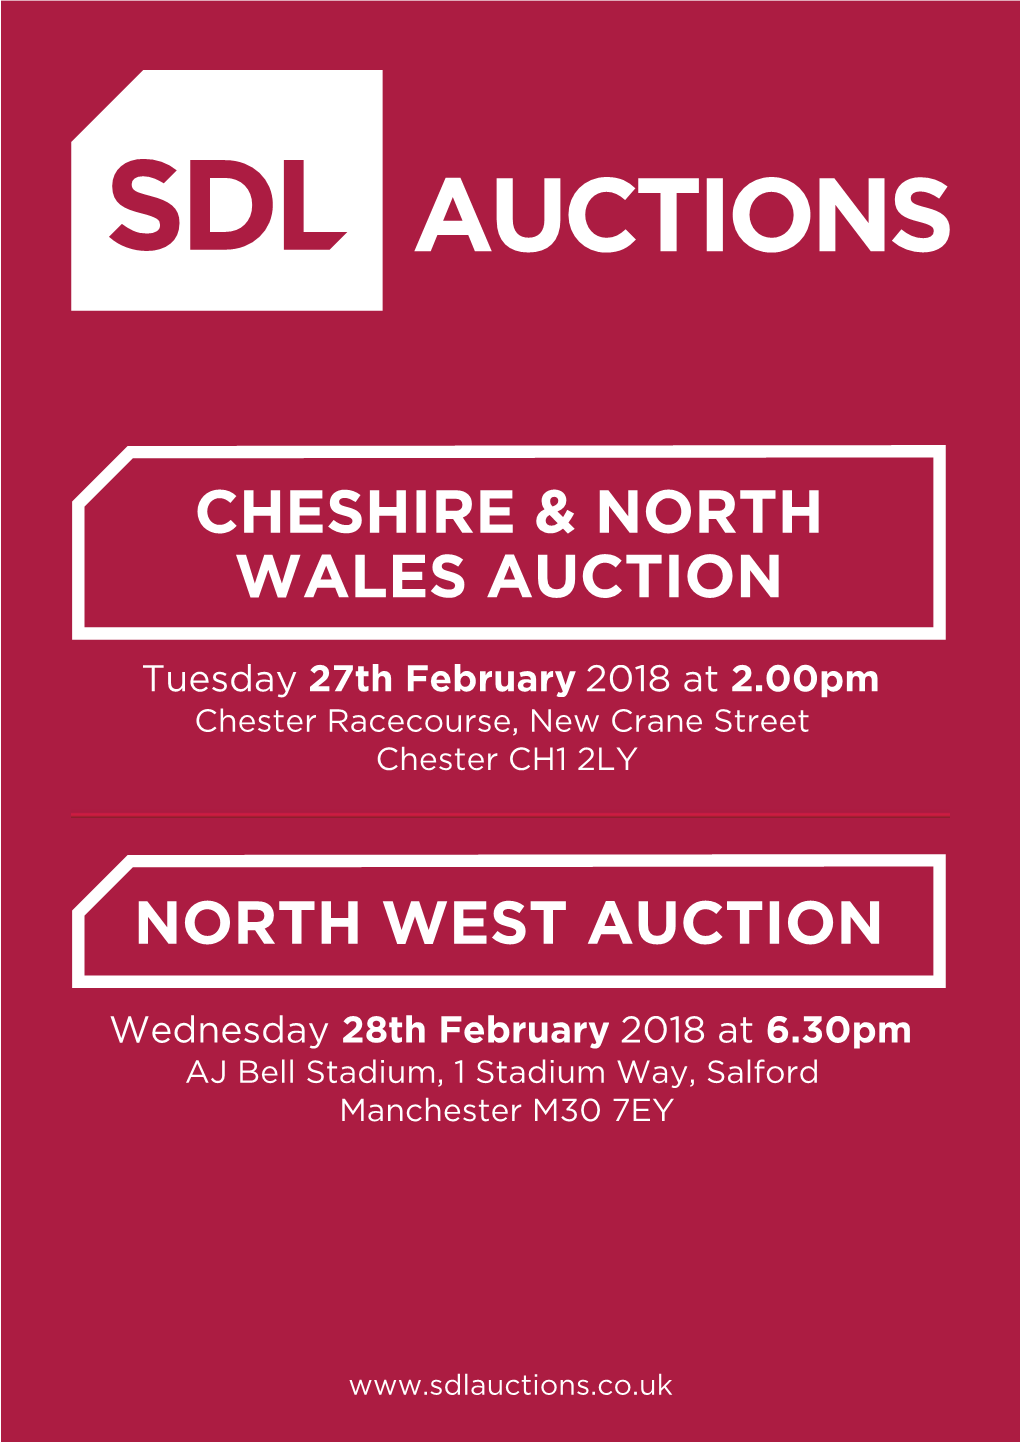 North West Auction Wales Auction Cheshire & North